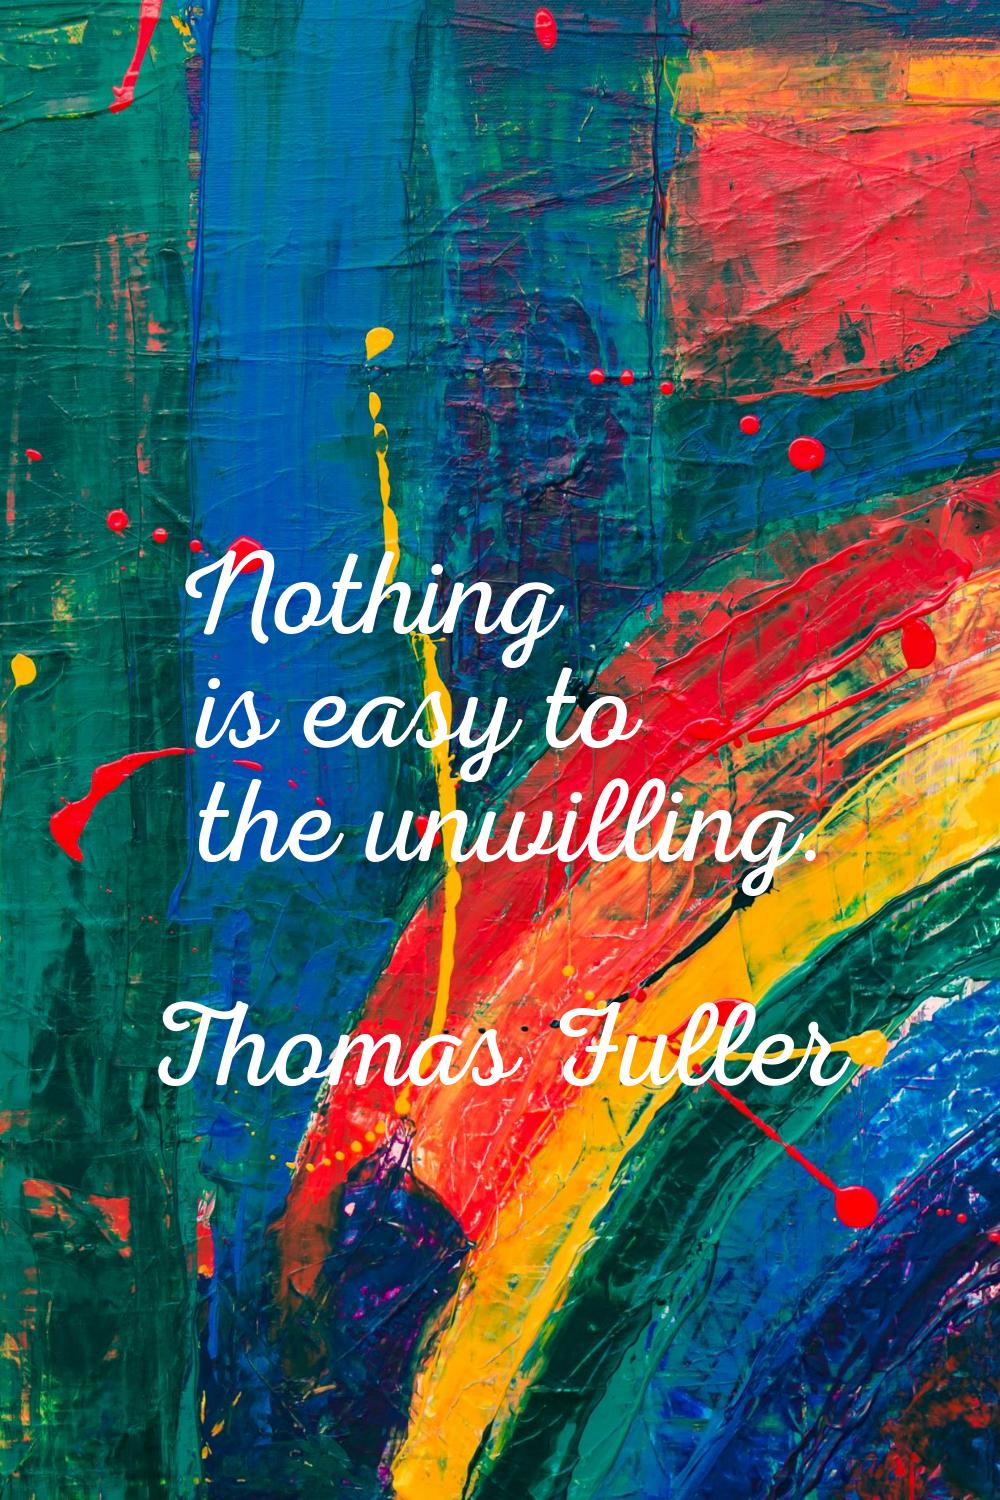 Nothing is easy to the unwilling.